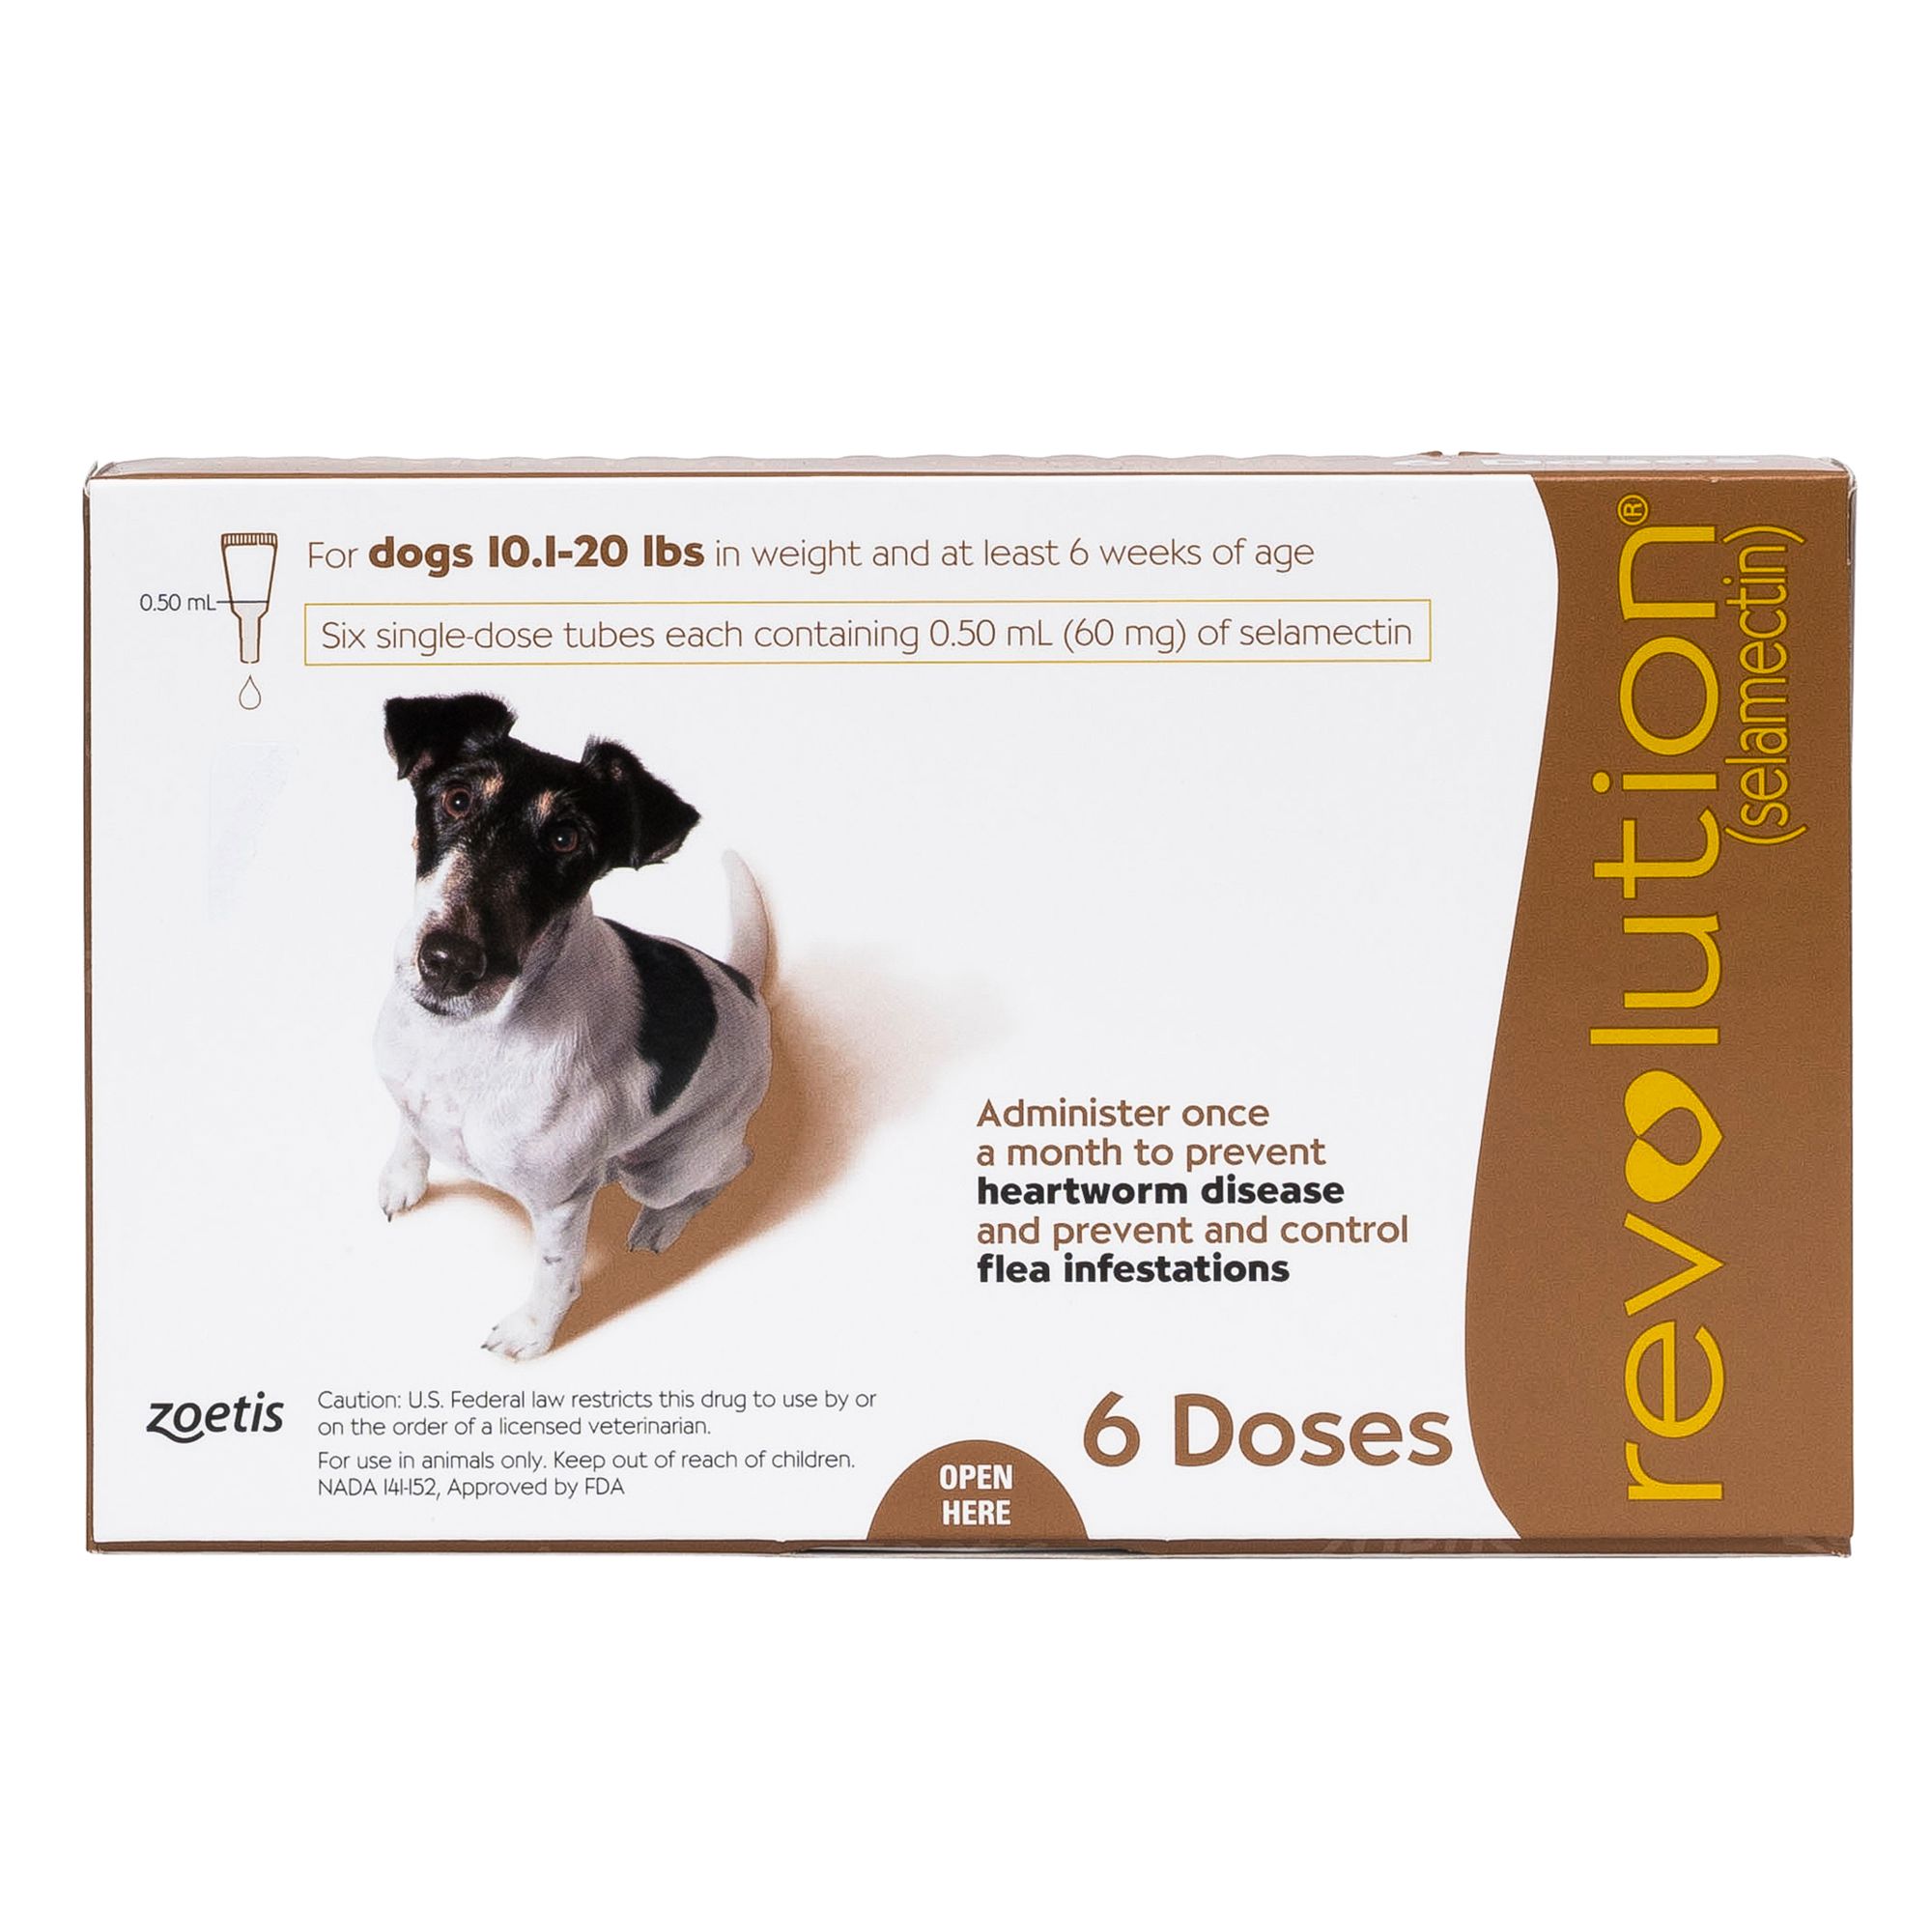 revolution-for-dogs-10-1-20-lbs